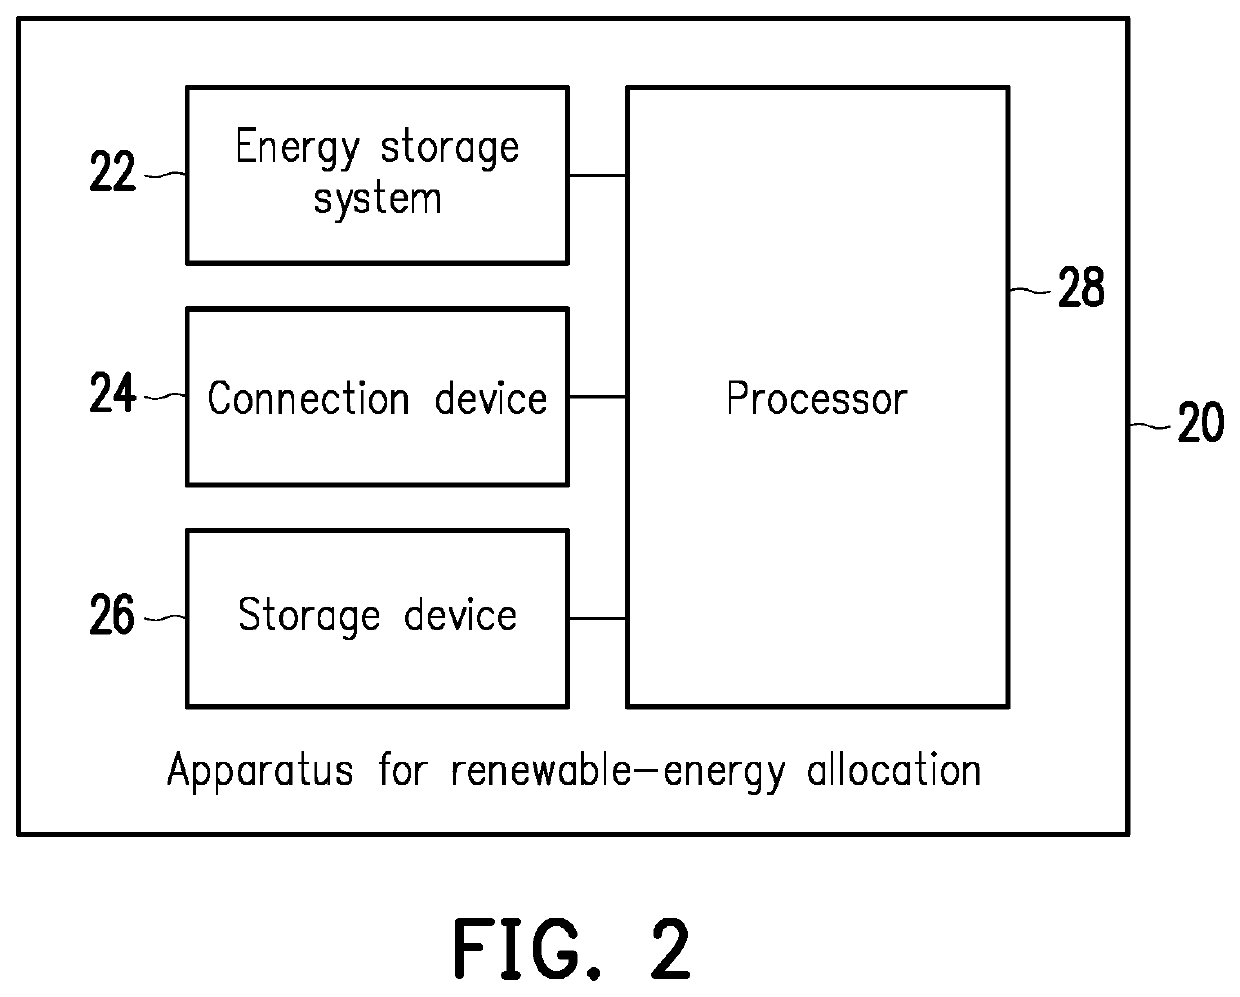 Method and apparatus for renewable energy allocation based on reinforcement learning